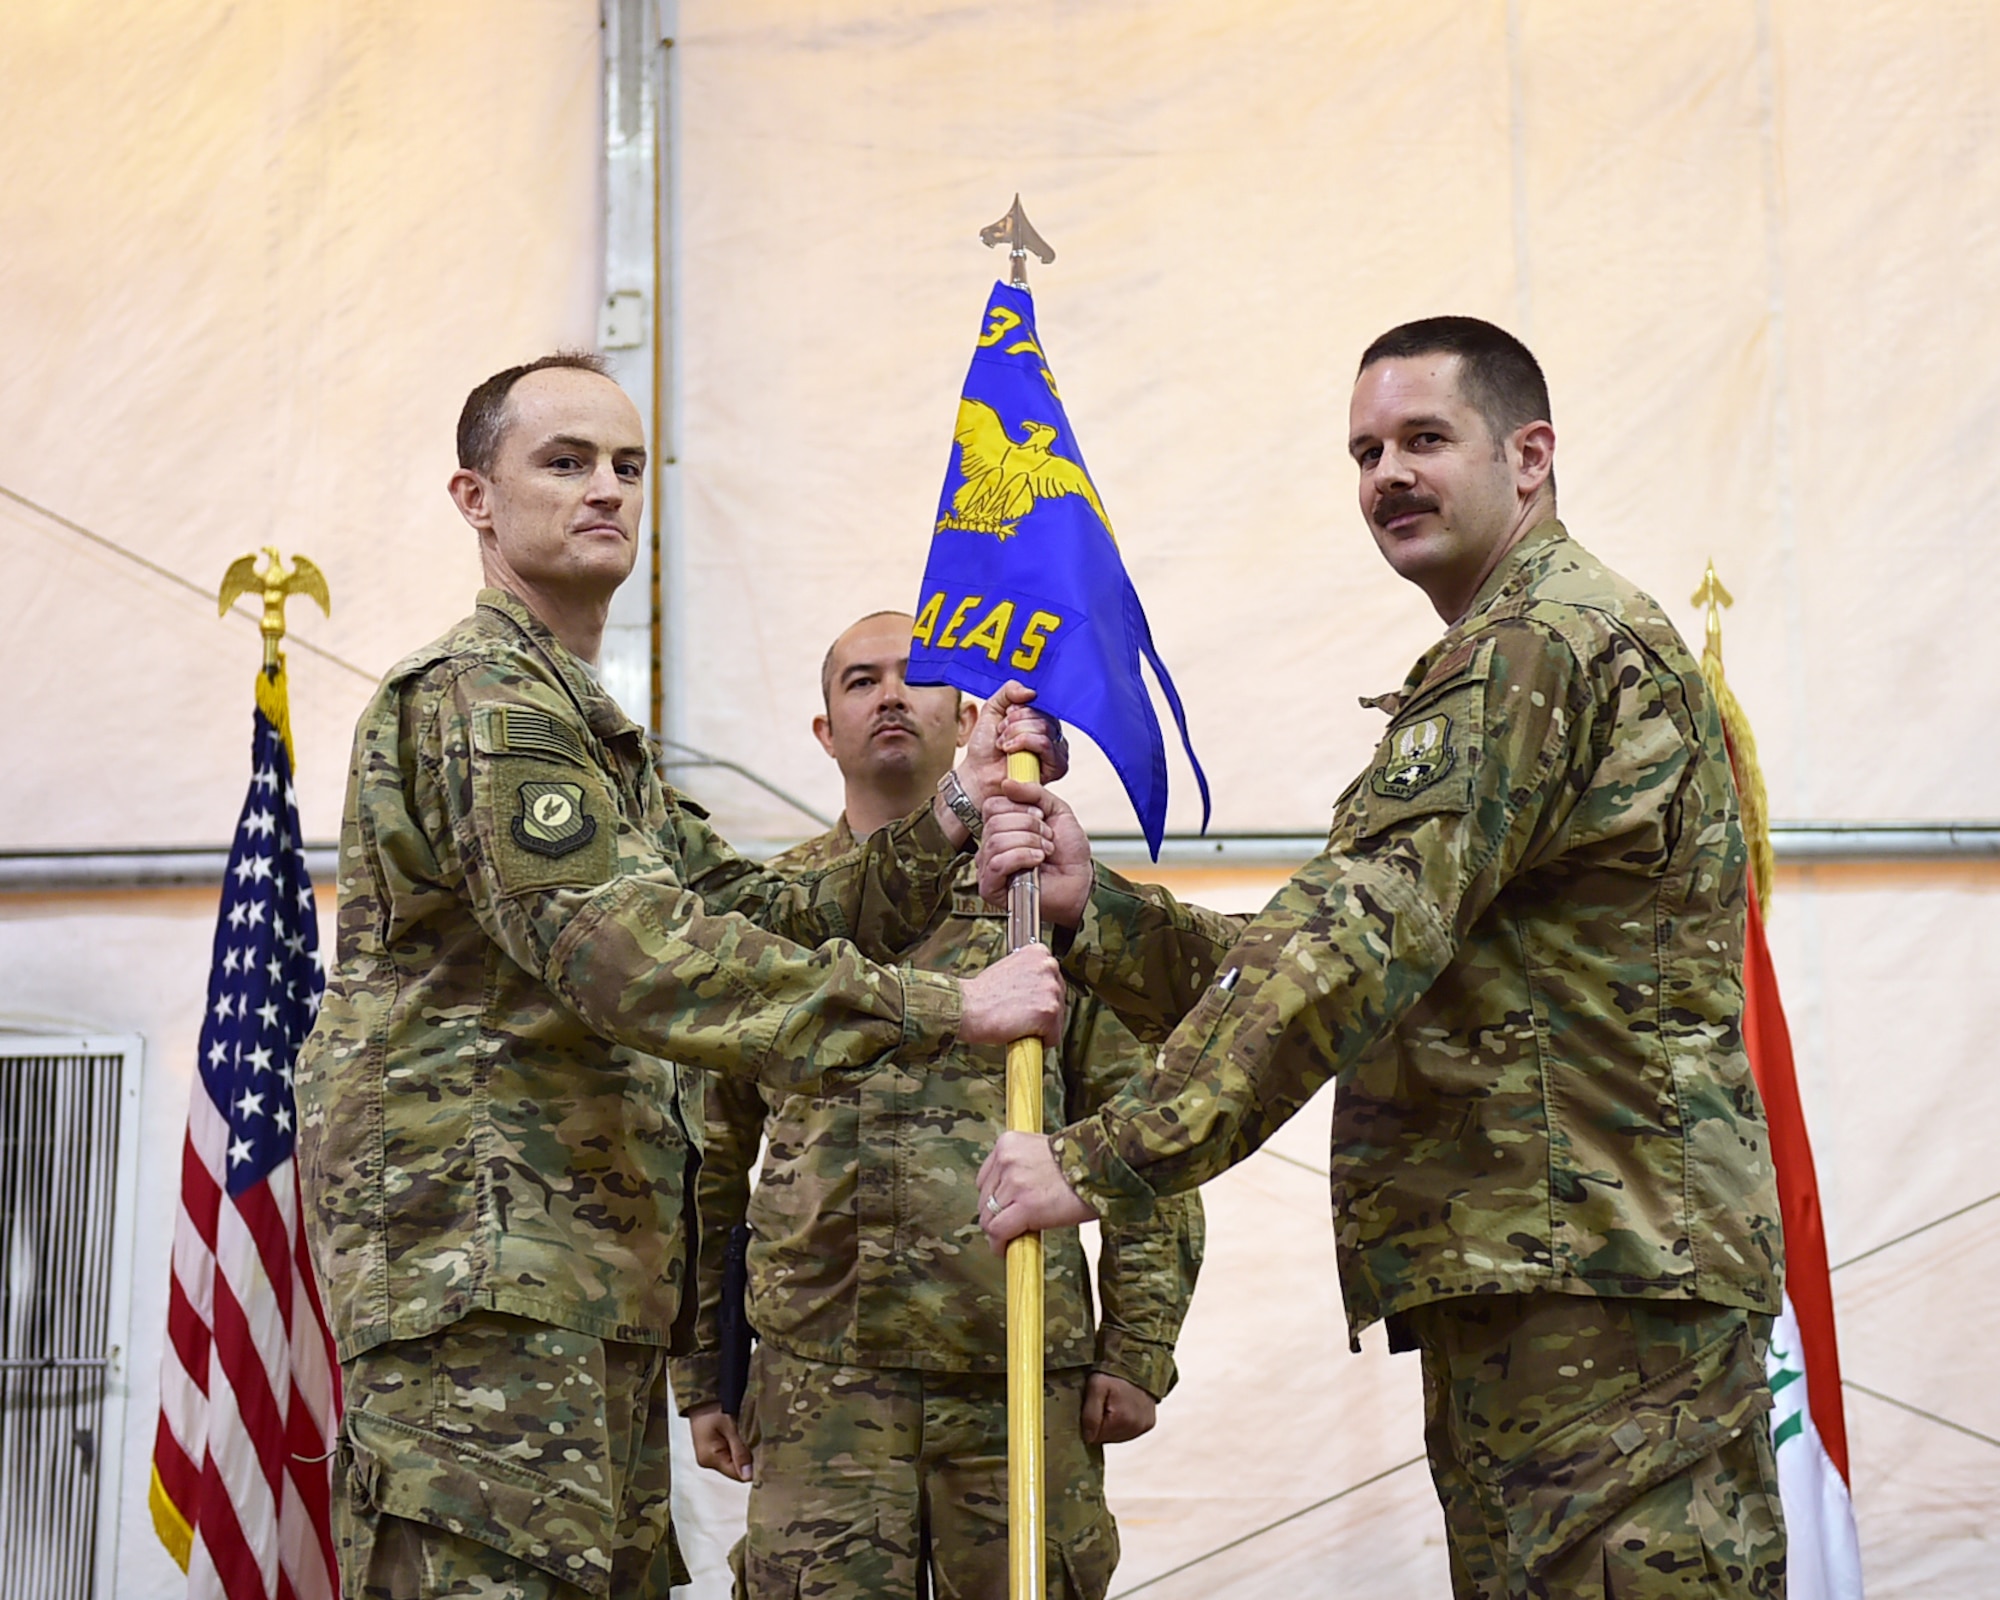 Col. Bradley Bridges, 370th Air Expeditionary Advisory Group commander, hands the 770th Air Expeditionary Advisory Squadron guidon to Maj. Todd Meyers during a change of command ceremony in Baghdad, Iraq, Jan. 9, 2016. Prior to assuming command of the 770th AEAS, Meyers served as the 911th Maintenance Squadron commander based in Pittsburgh International Airport Air Reserve Station, Coraopolis, Pennsylvania. The 770 AEAS provides direct support to the Iraqi Air Force through aircraft maintenance advise and assist missions.  (U.S. Air Force photo by Staff Sgt. Jerilyn Quintanilla)